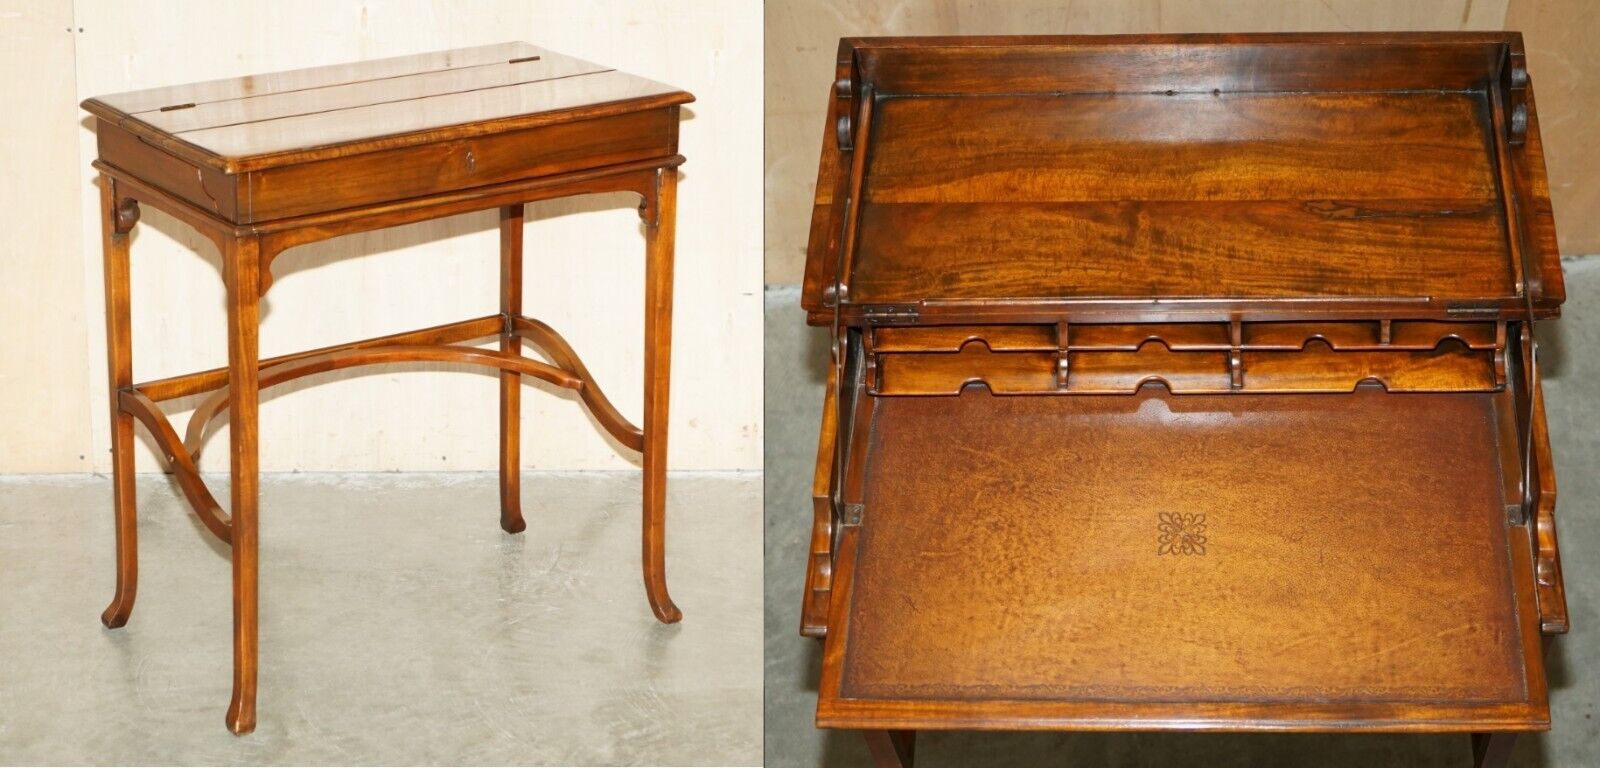 VINTAGE THEODORE ALEXANDER MILITARY CAMPAIGN STYLE WRITING DESK BROWN LEATHER